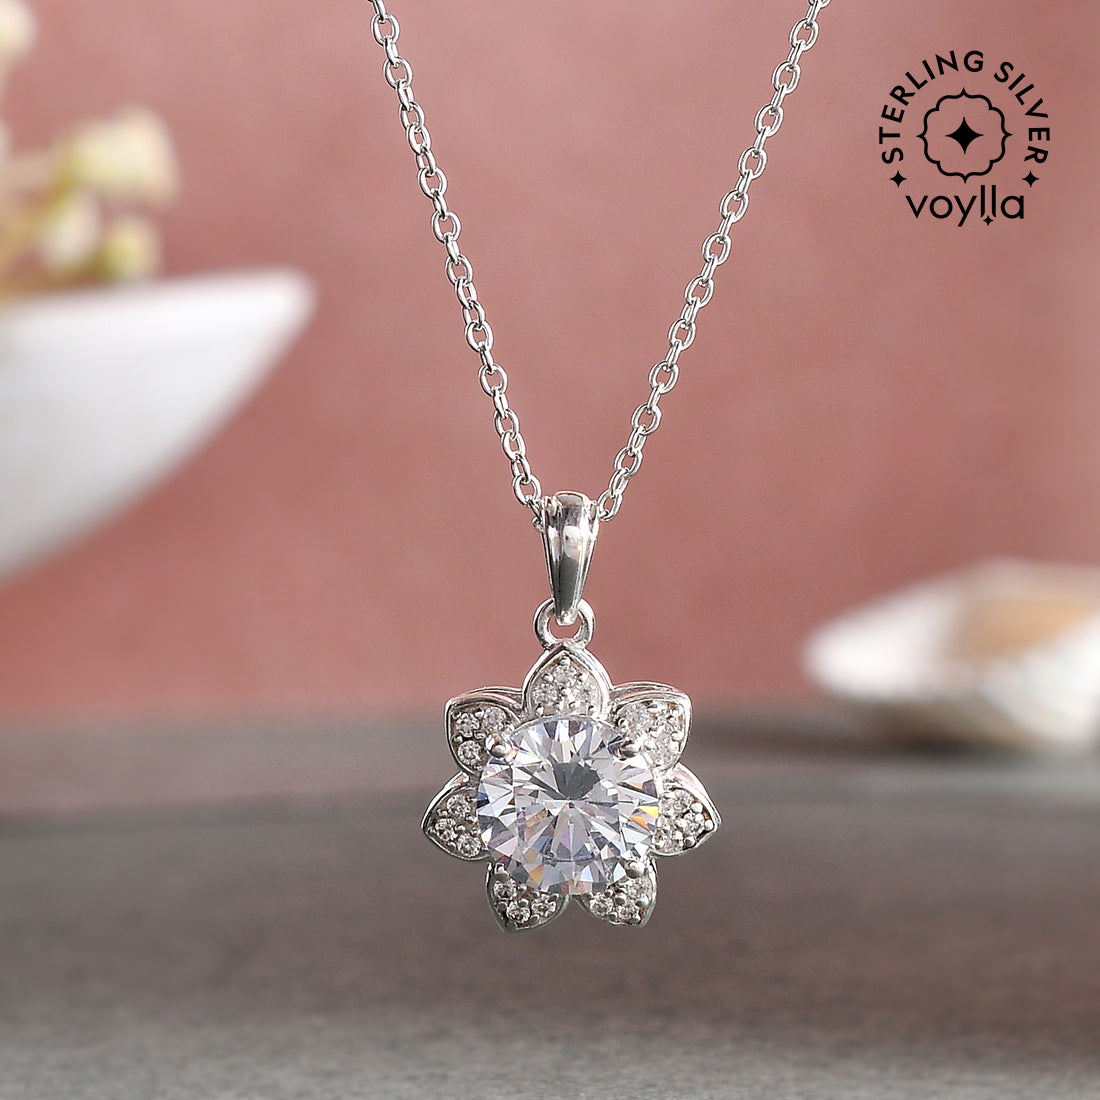 Women's Floral Style 925 Sterling Silver Pendant - Voylla